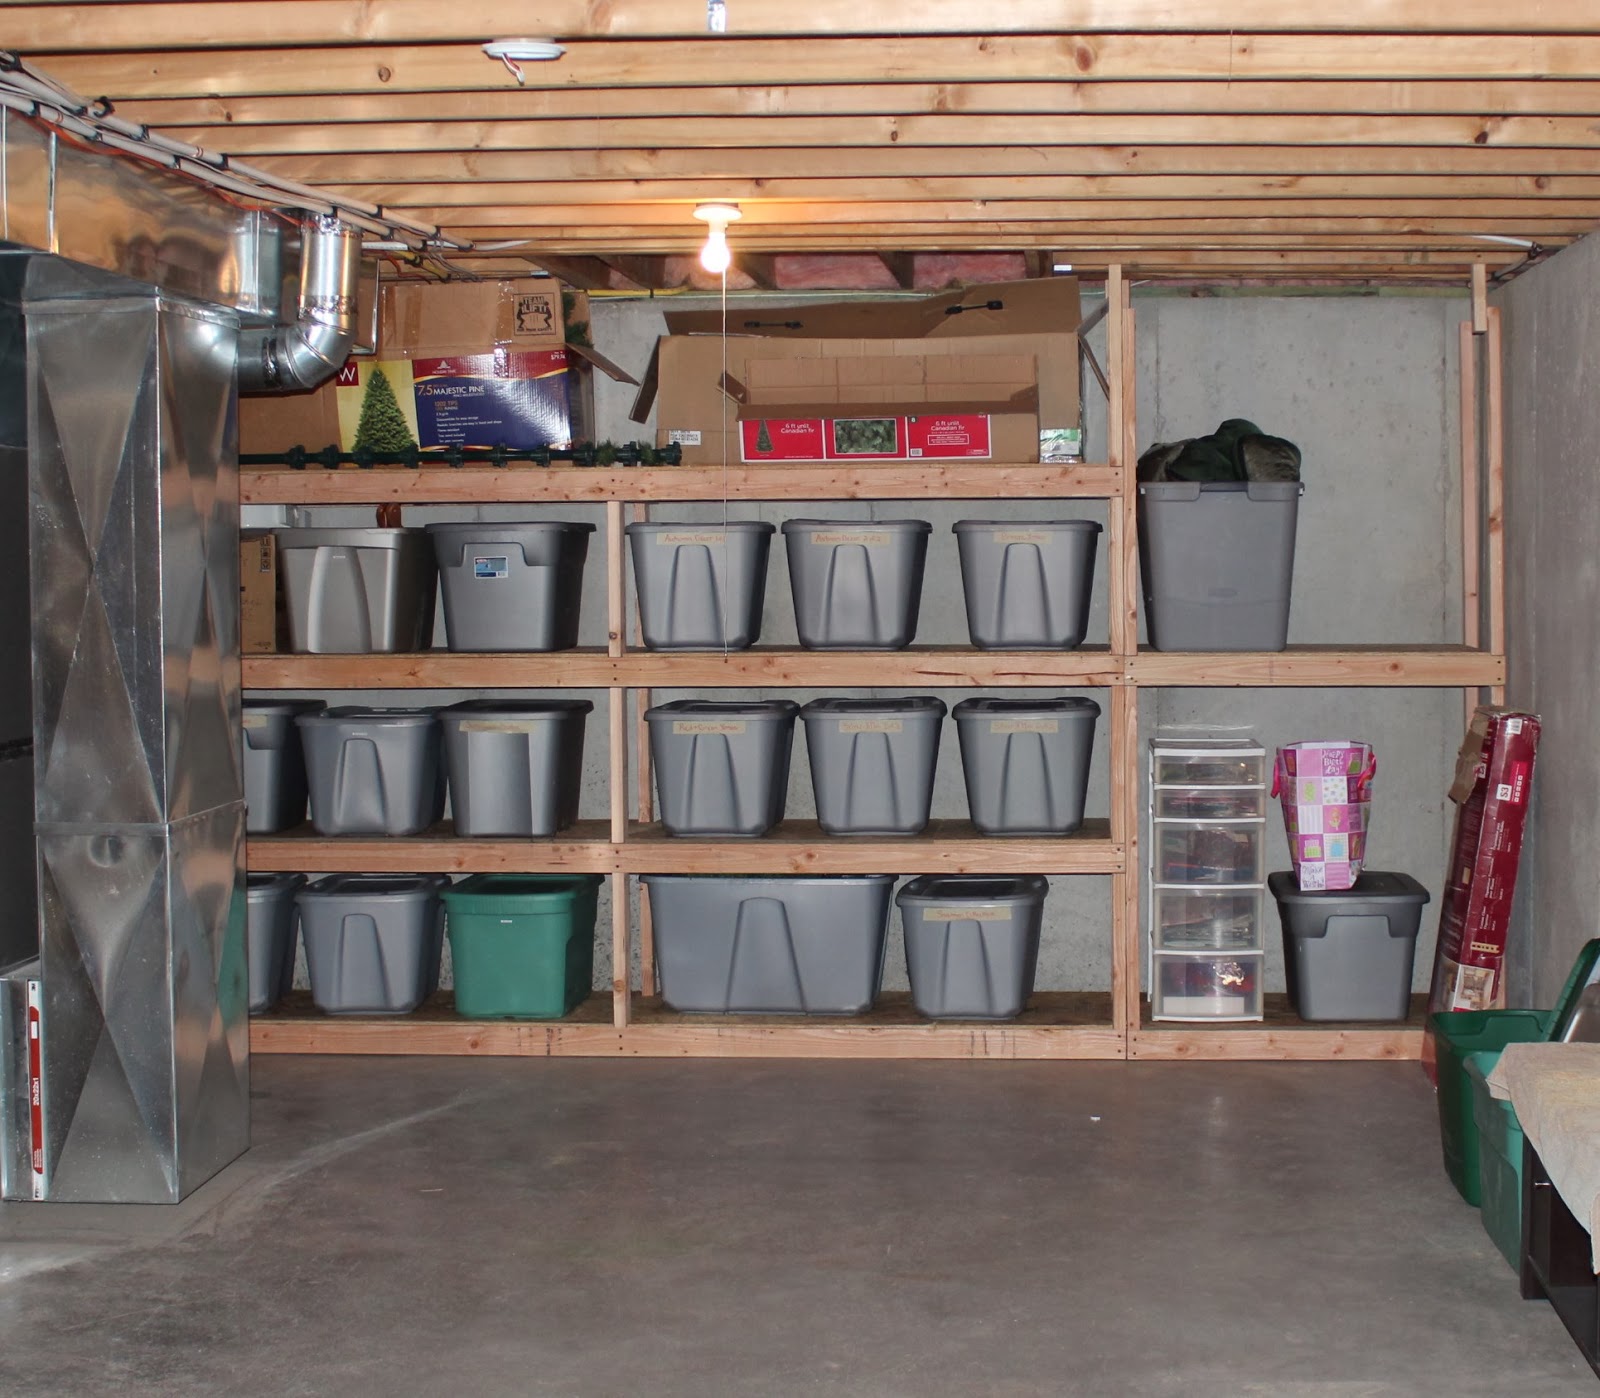 DIY Basement Shelving: Because Not Every House Project Can Be 